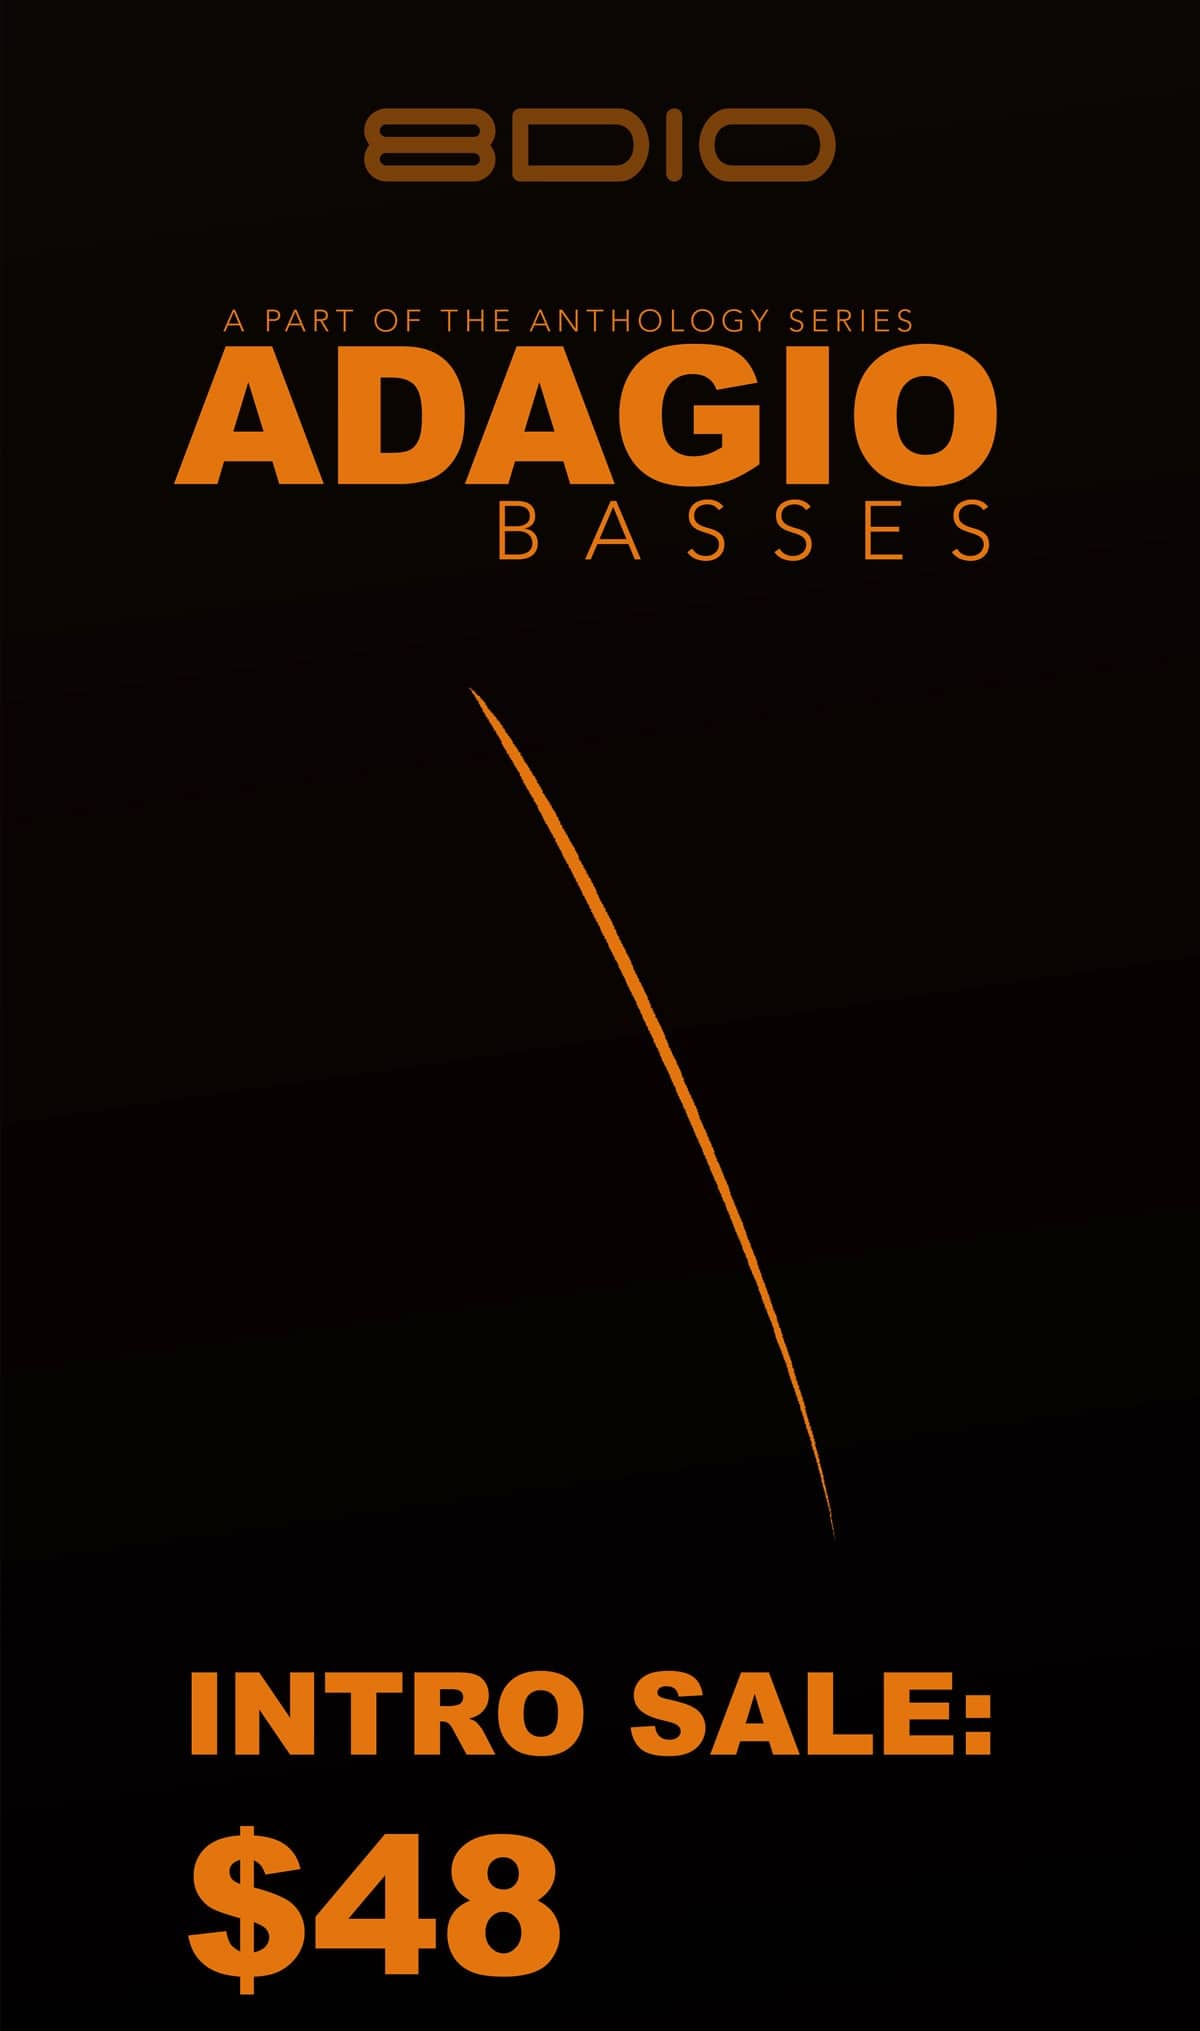 Adagio Basses 2.0 // Now Available // Intro Sale $48